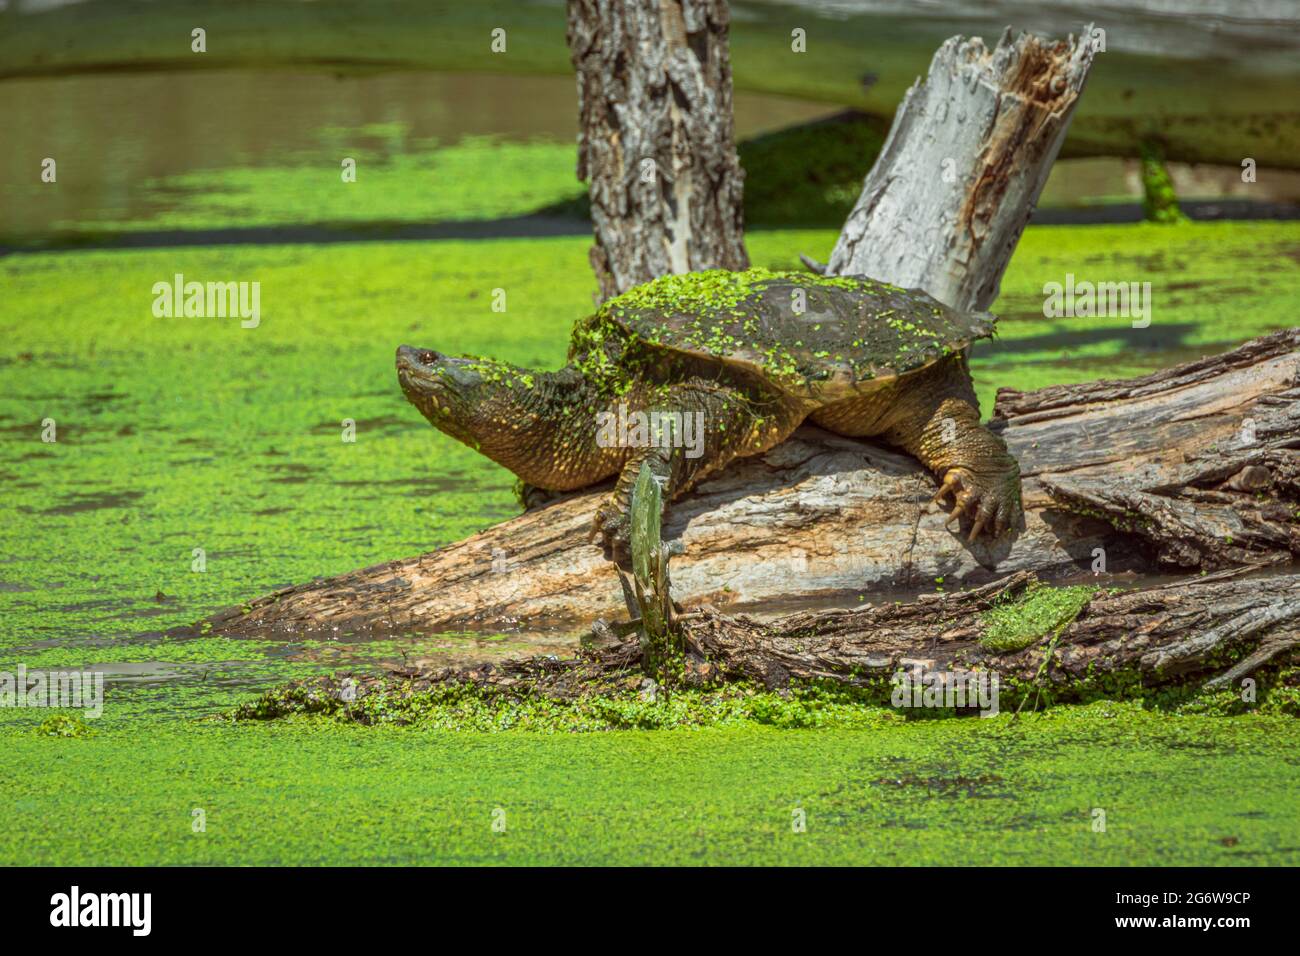 Common Snapping Turtle (Testudo serpentine) basking on partially submerged cottonwood tree trunk in wetlands area, Castle Rock Colorado USA. Stock Photo